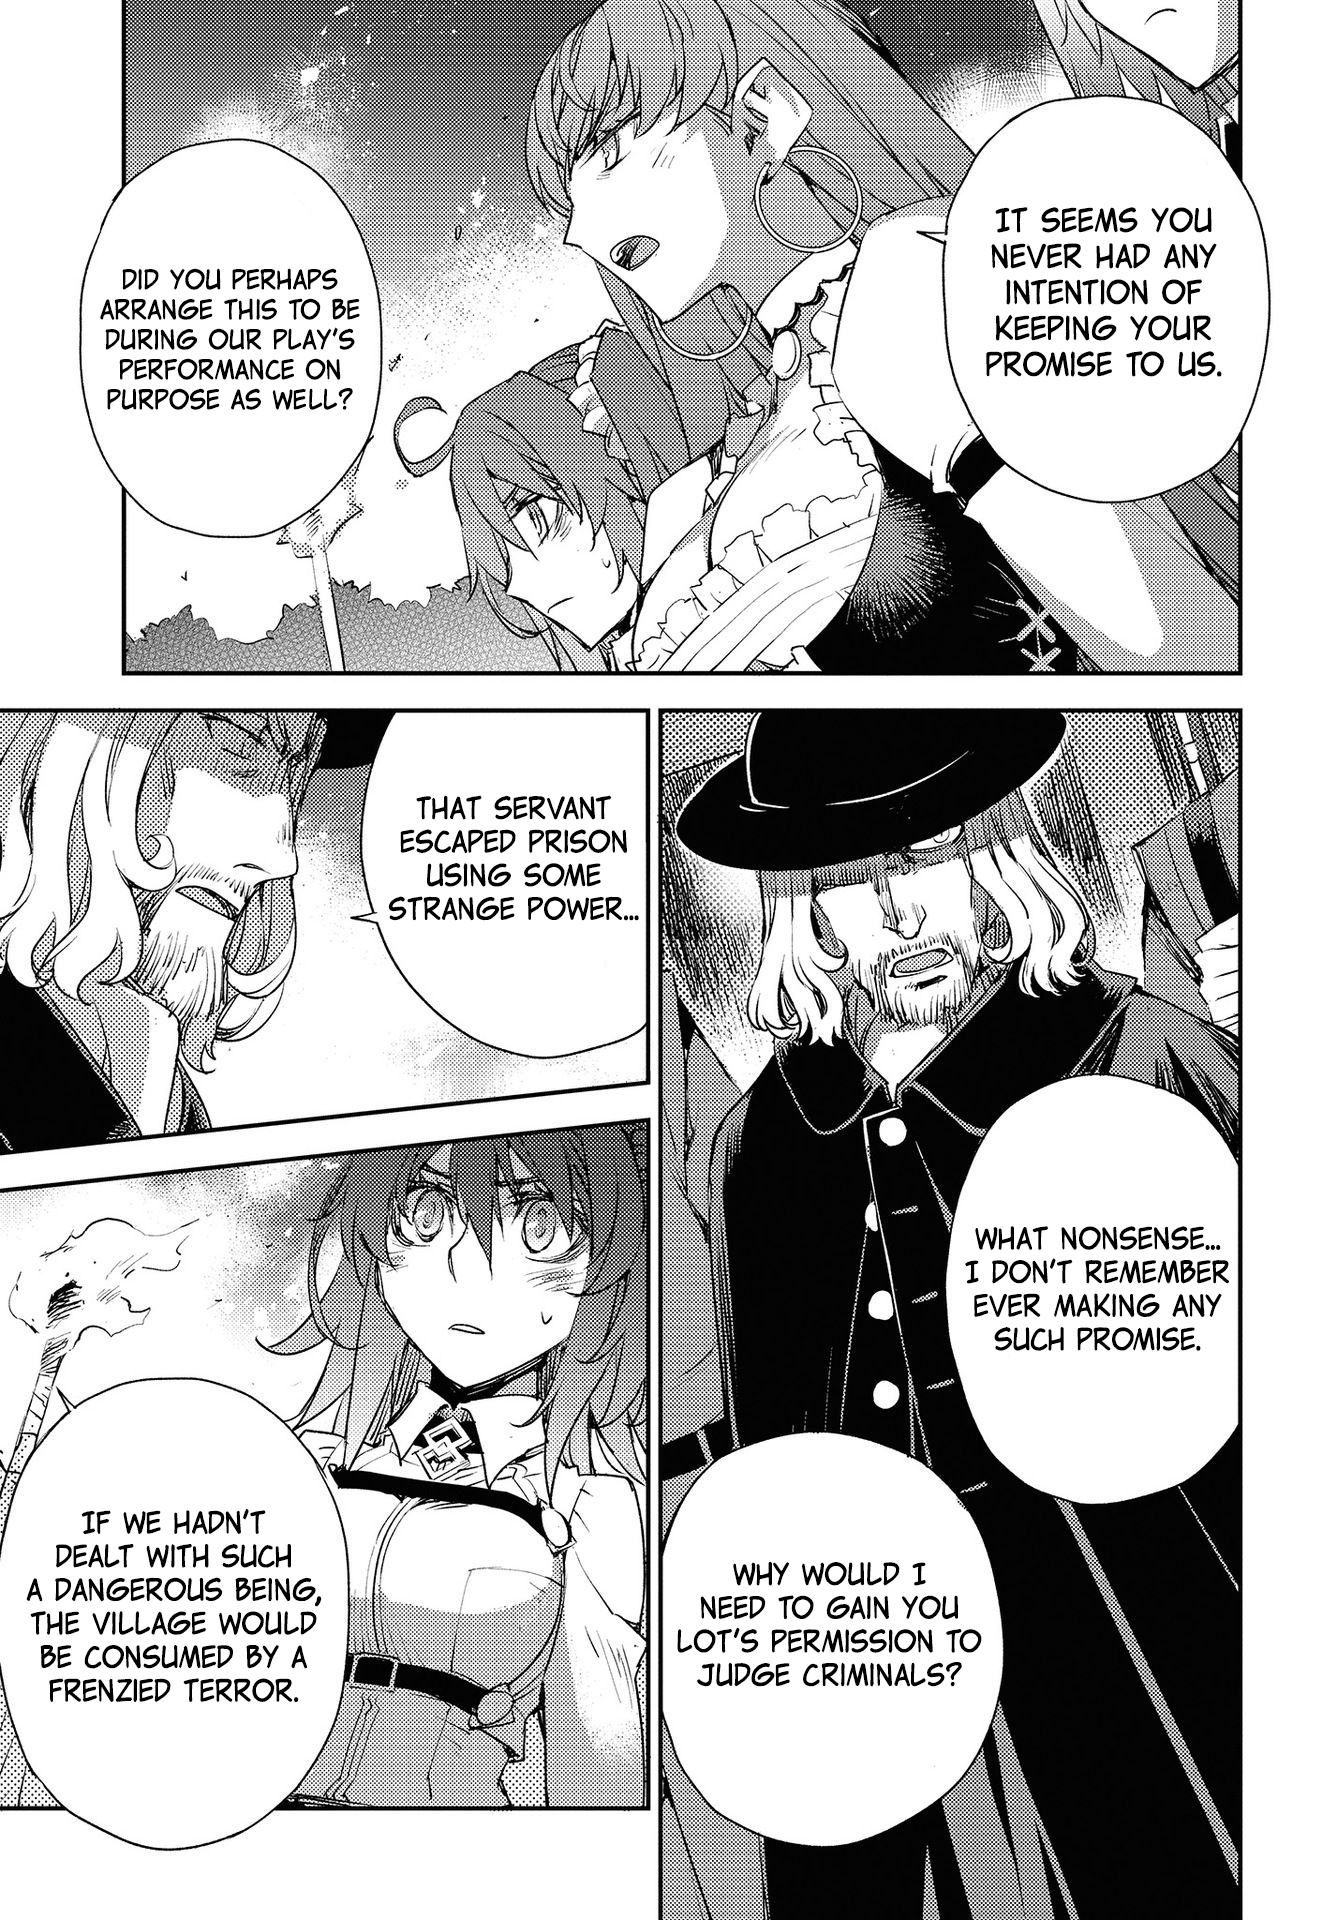 Fate/grand Order: Epic Of Remnant: Pseudo-Singularity Iv: The Forbidden Advent Garden, Salem - Heretical Salem Chapter 15: The First Knot - 5 - Picture 3